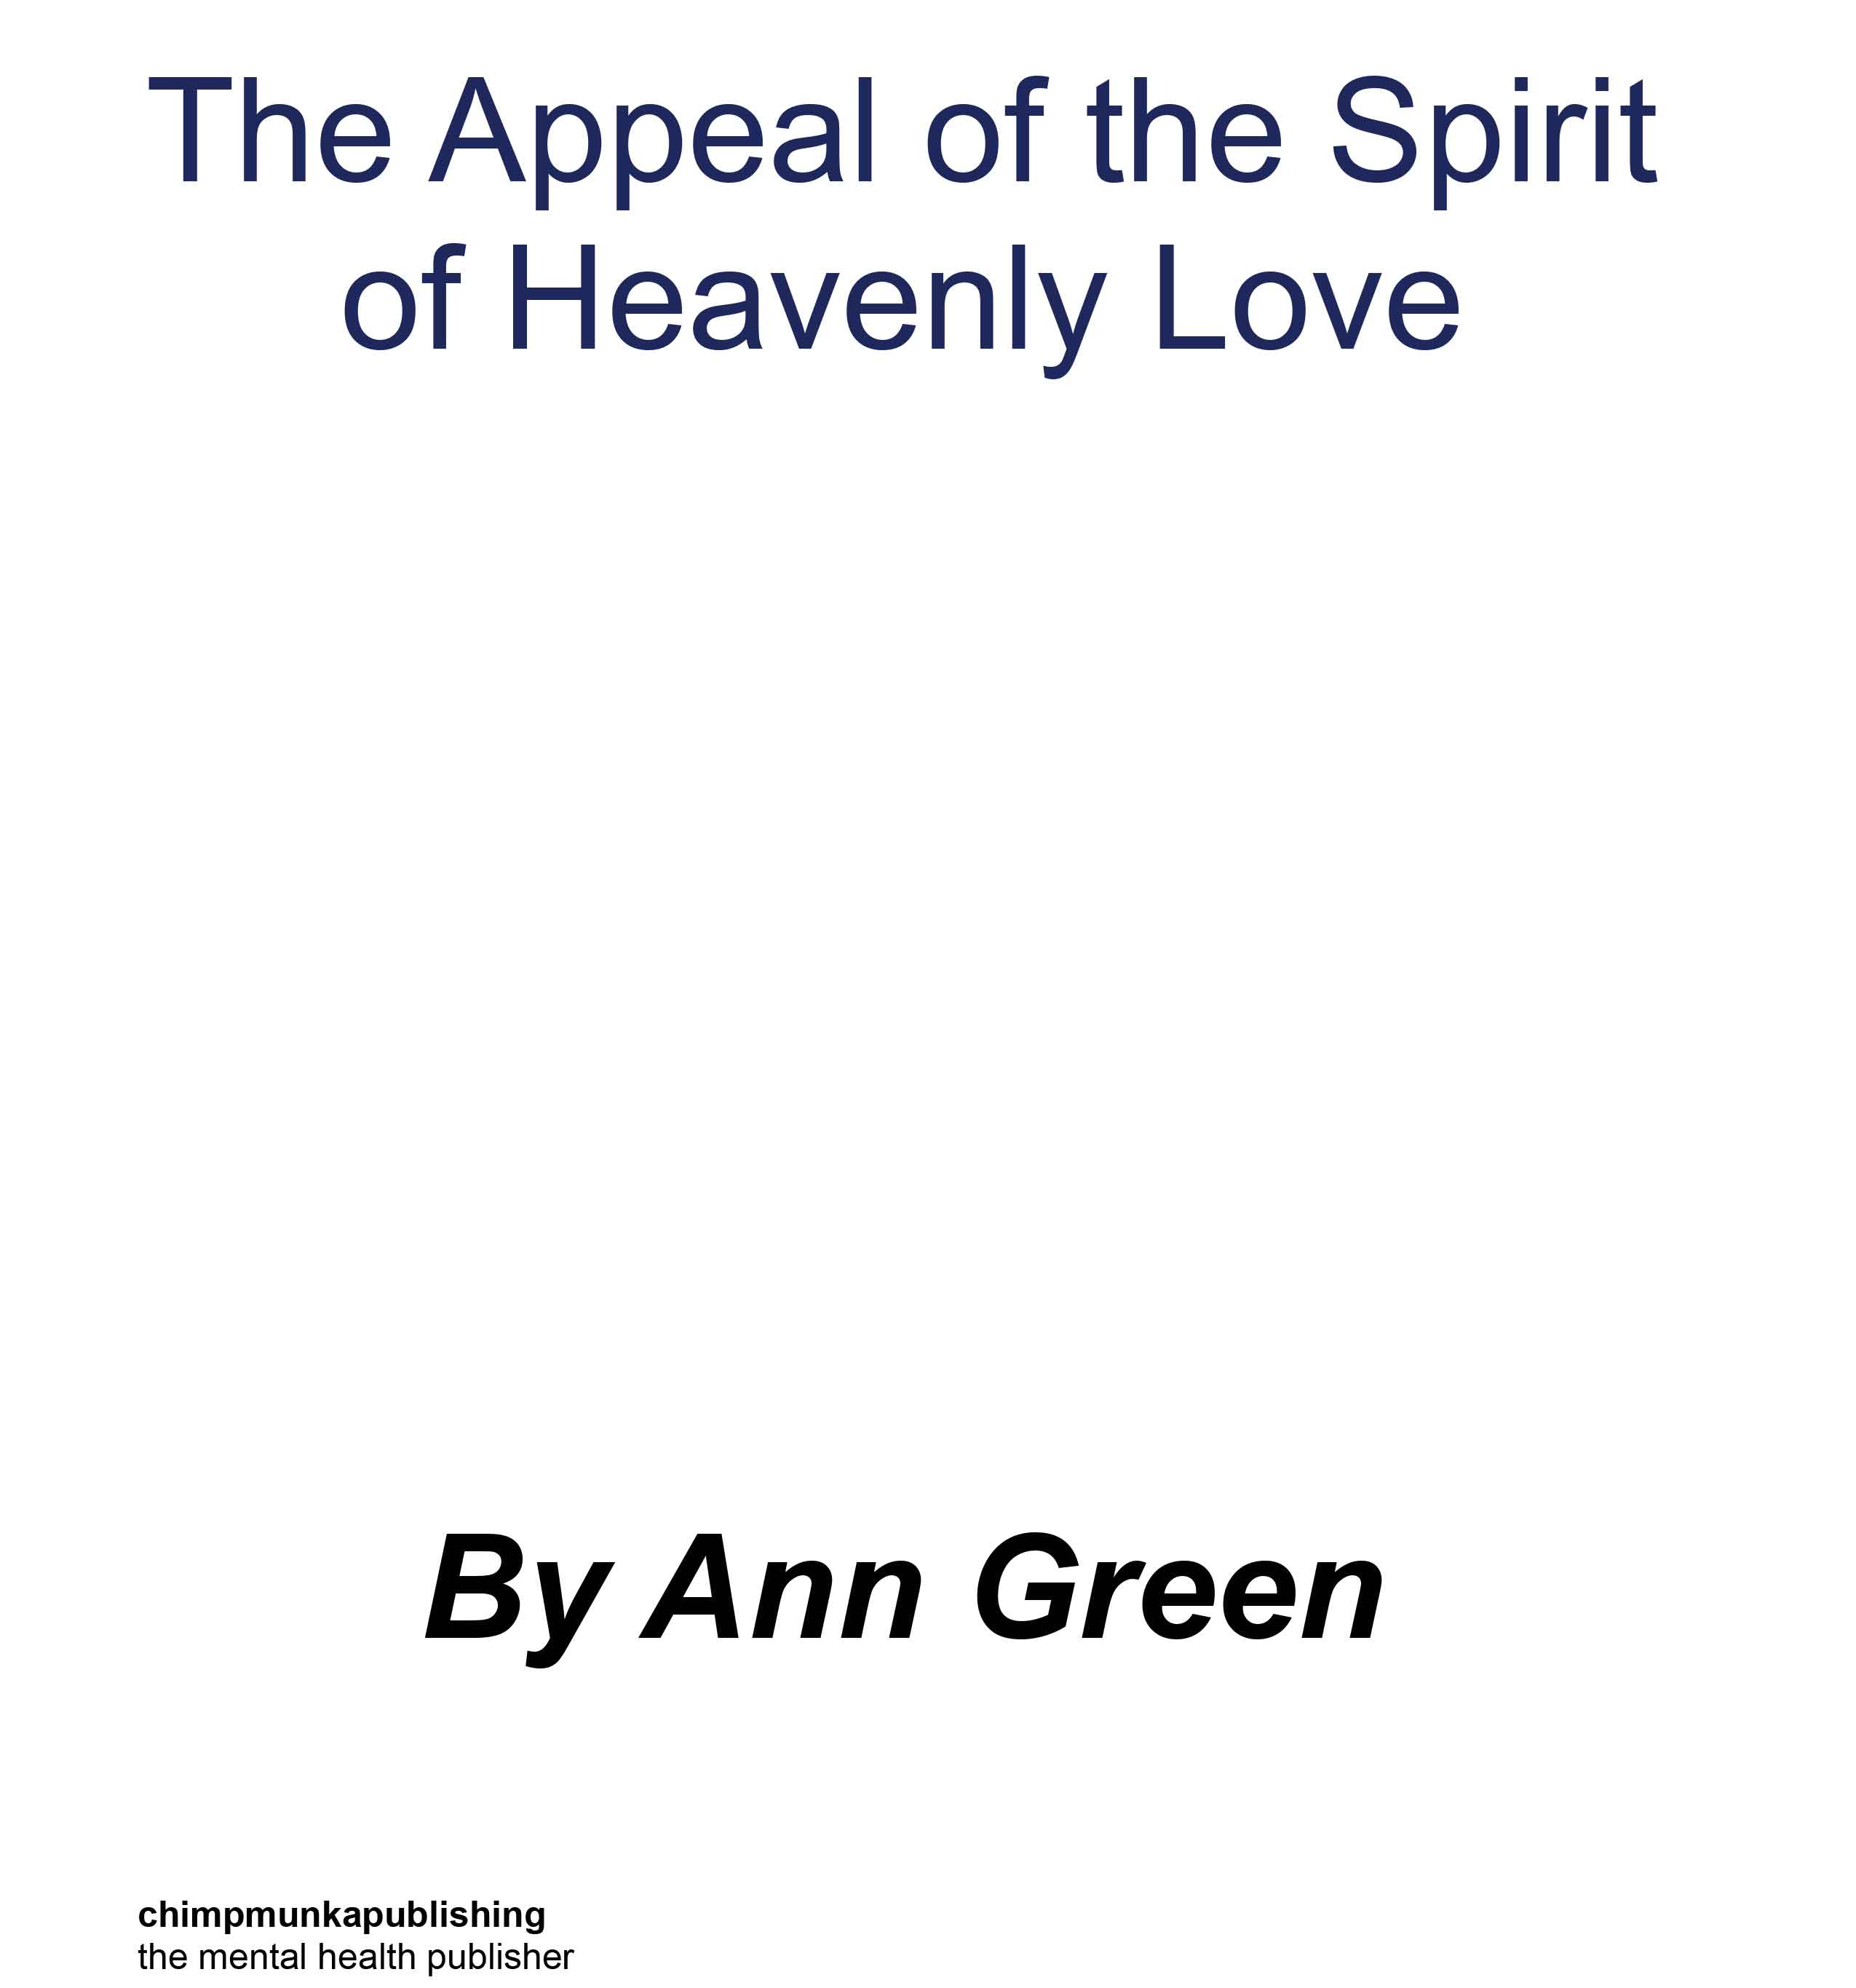 The Appeal of the Spirit of Heavenly Love